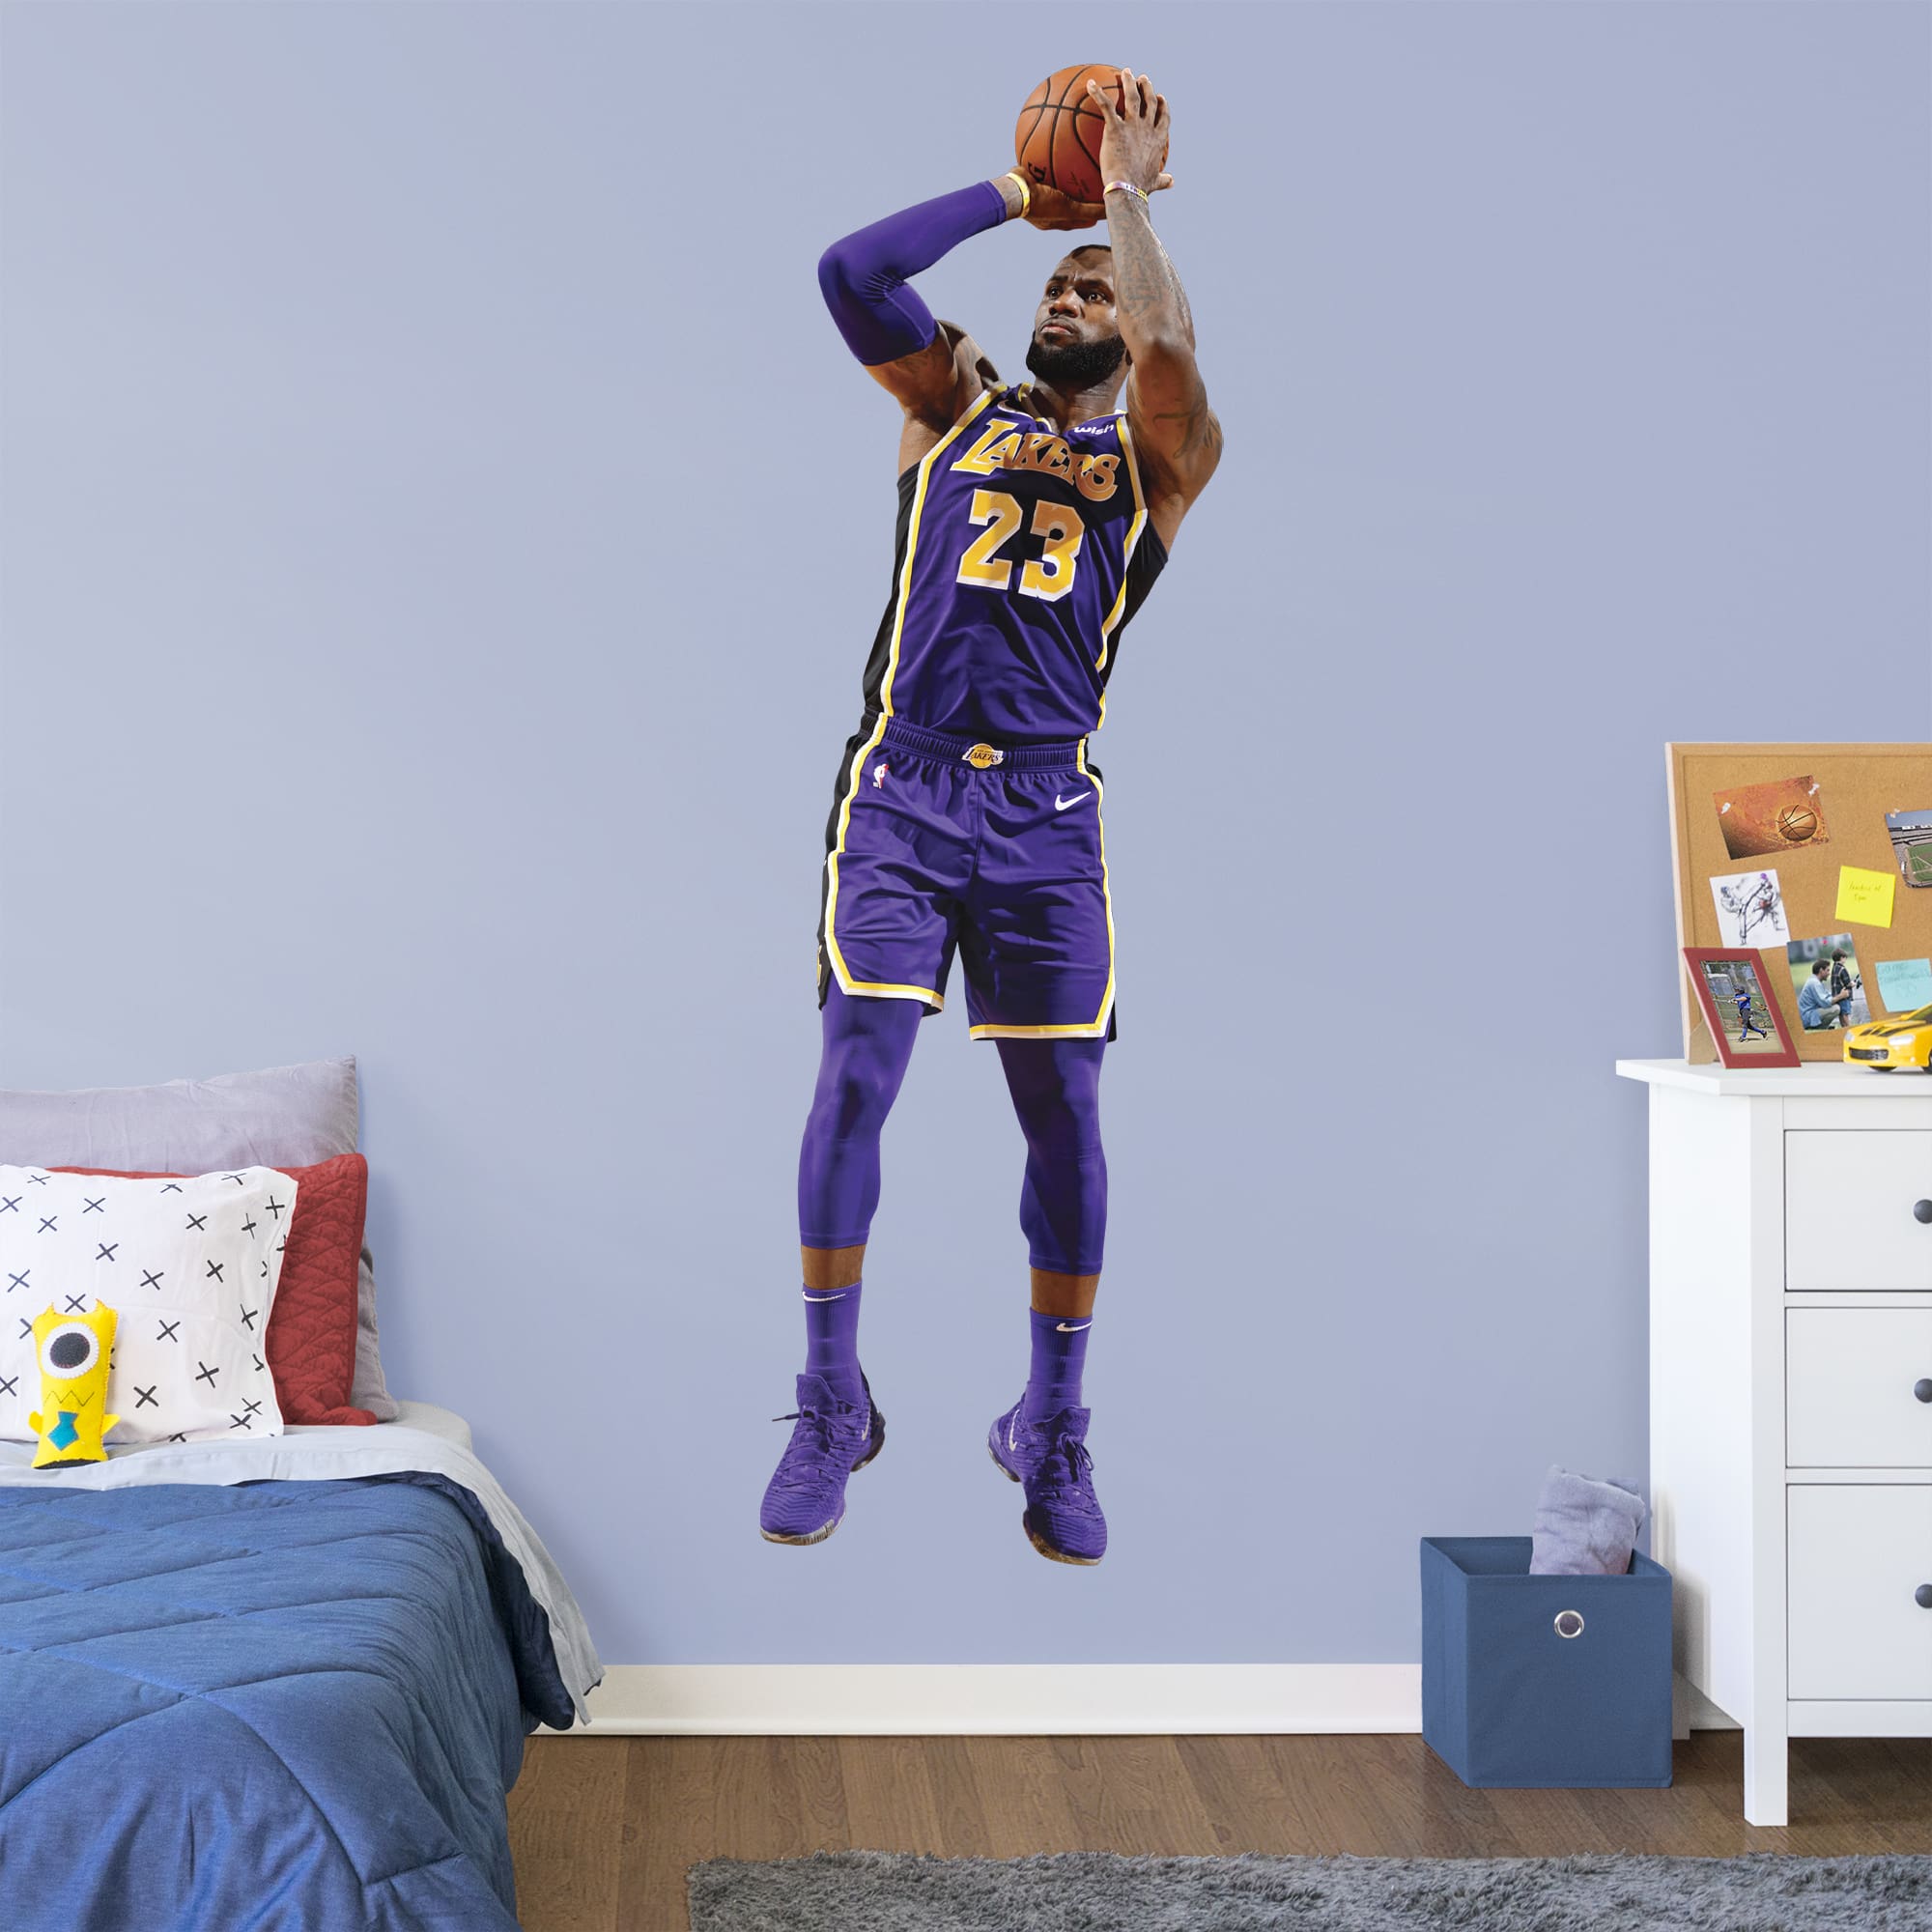 LeBron James for Los Angeles Lakers: Shooting - Officially Licensed NBA Removable Wall Decal Life-Size Athlete + 2 Decals (26"W